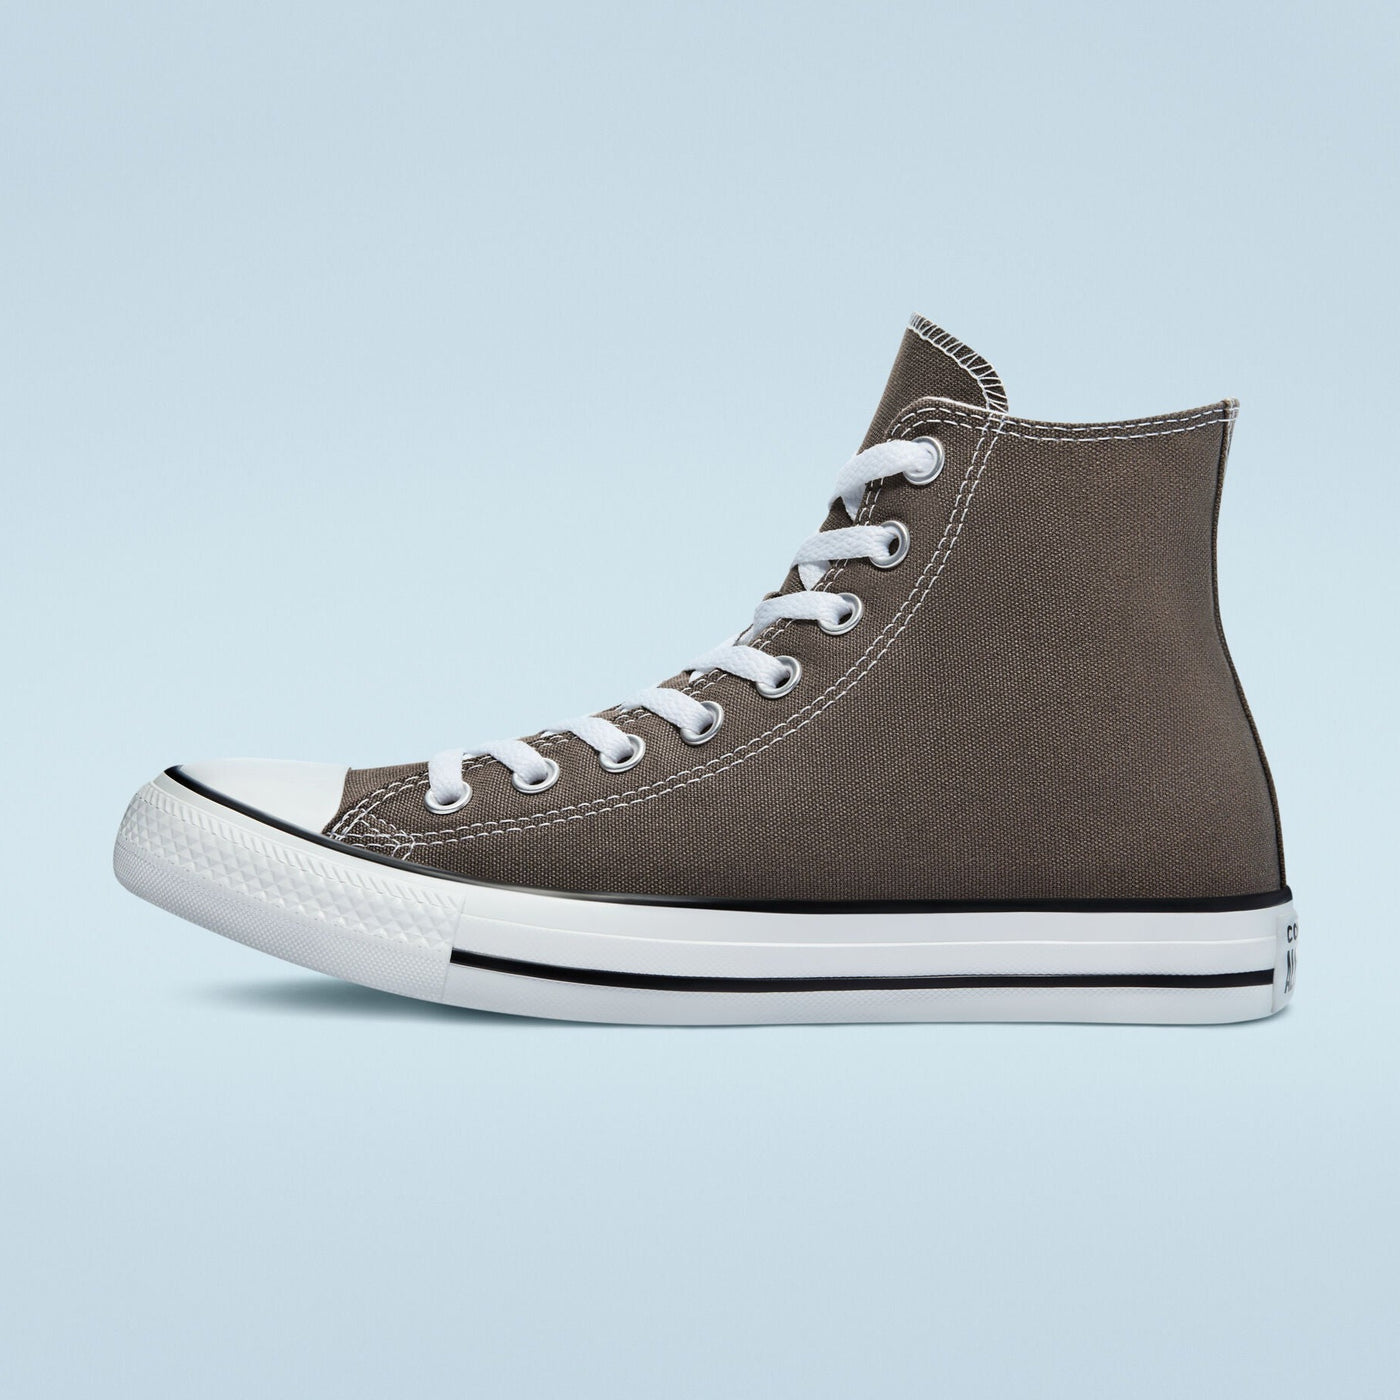 Converse Chuck Taylor All Star High Top Charcoal Left